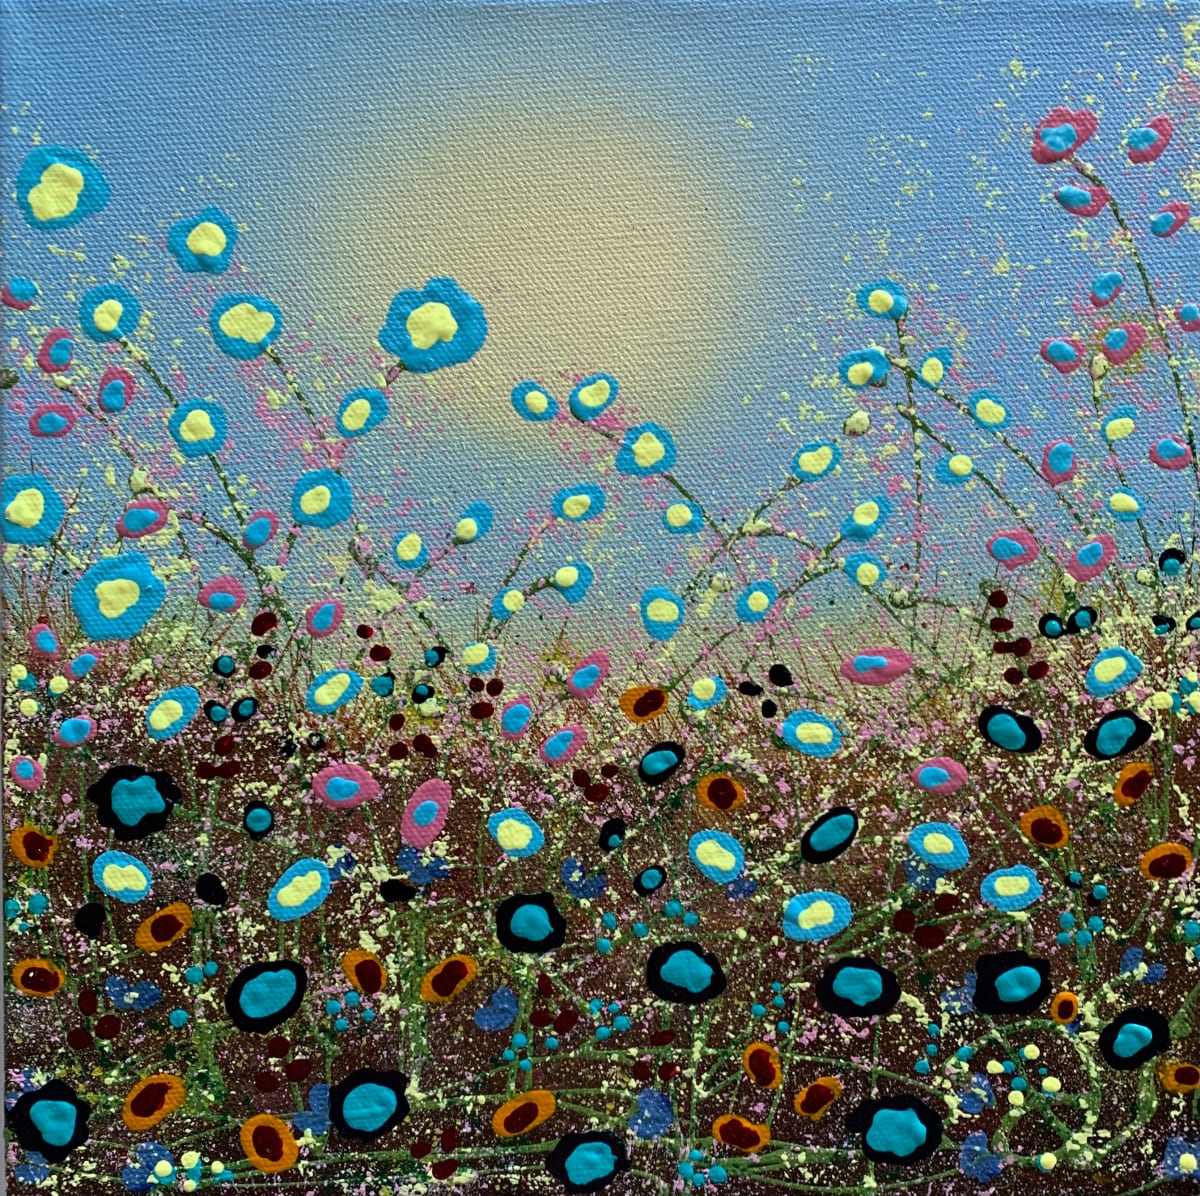 Happy Walks Through Happy Meadows Number 1025  Image: Contemporary Great Lakes Inspired Imaginative Art